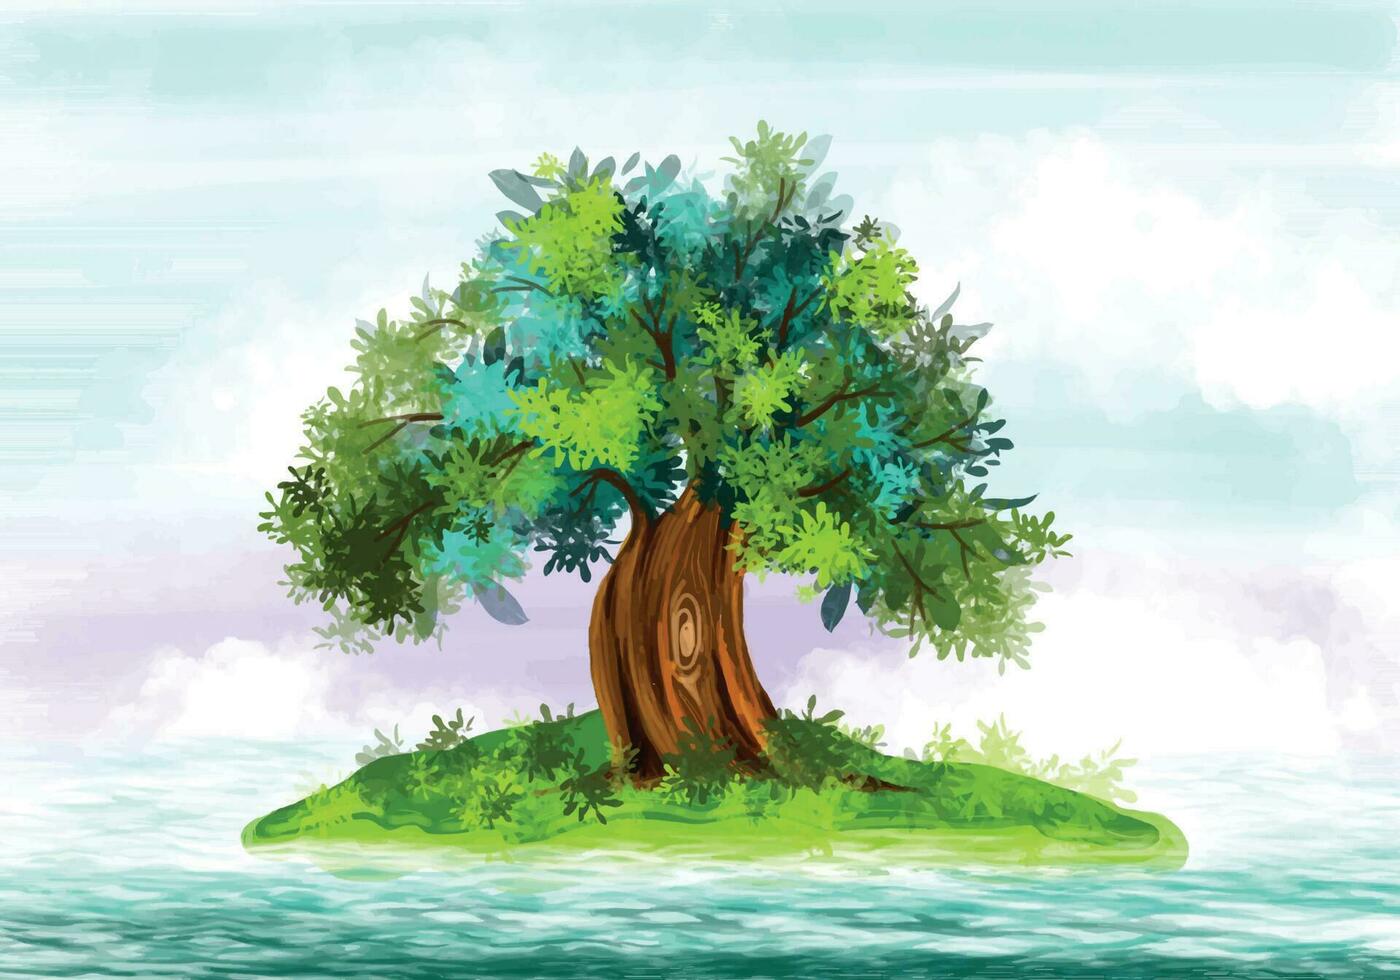 Landscape and architecture on watercolor tree background vector